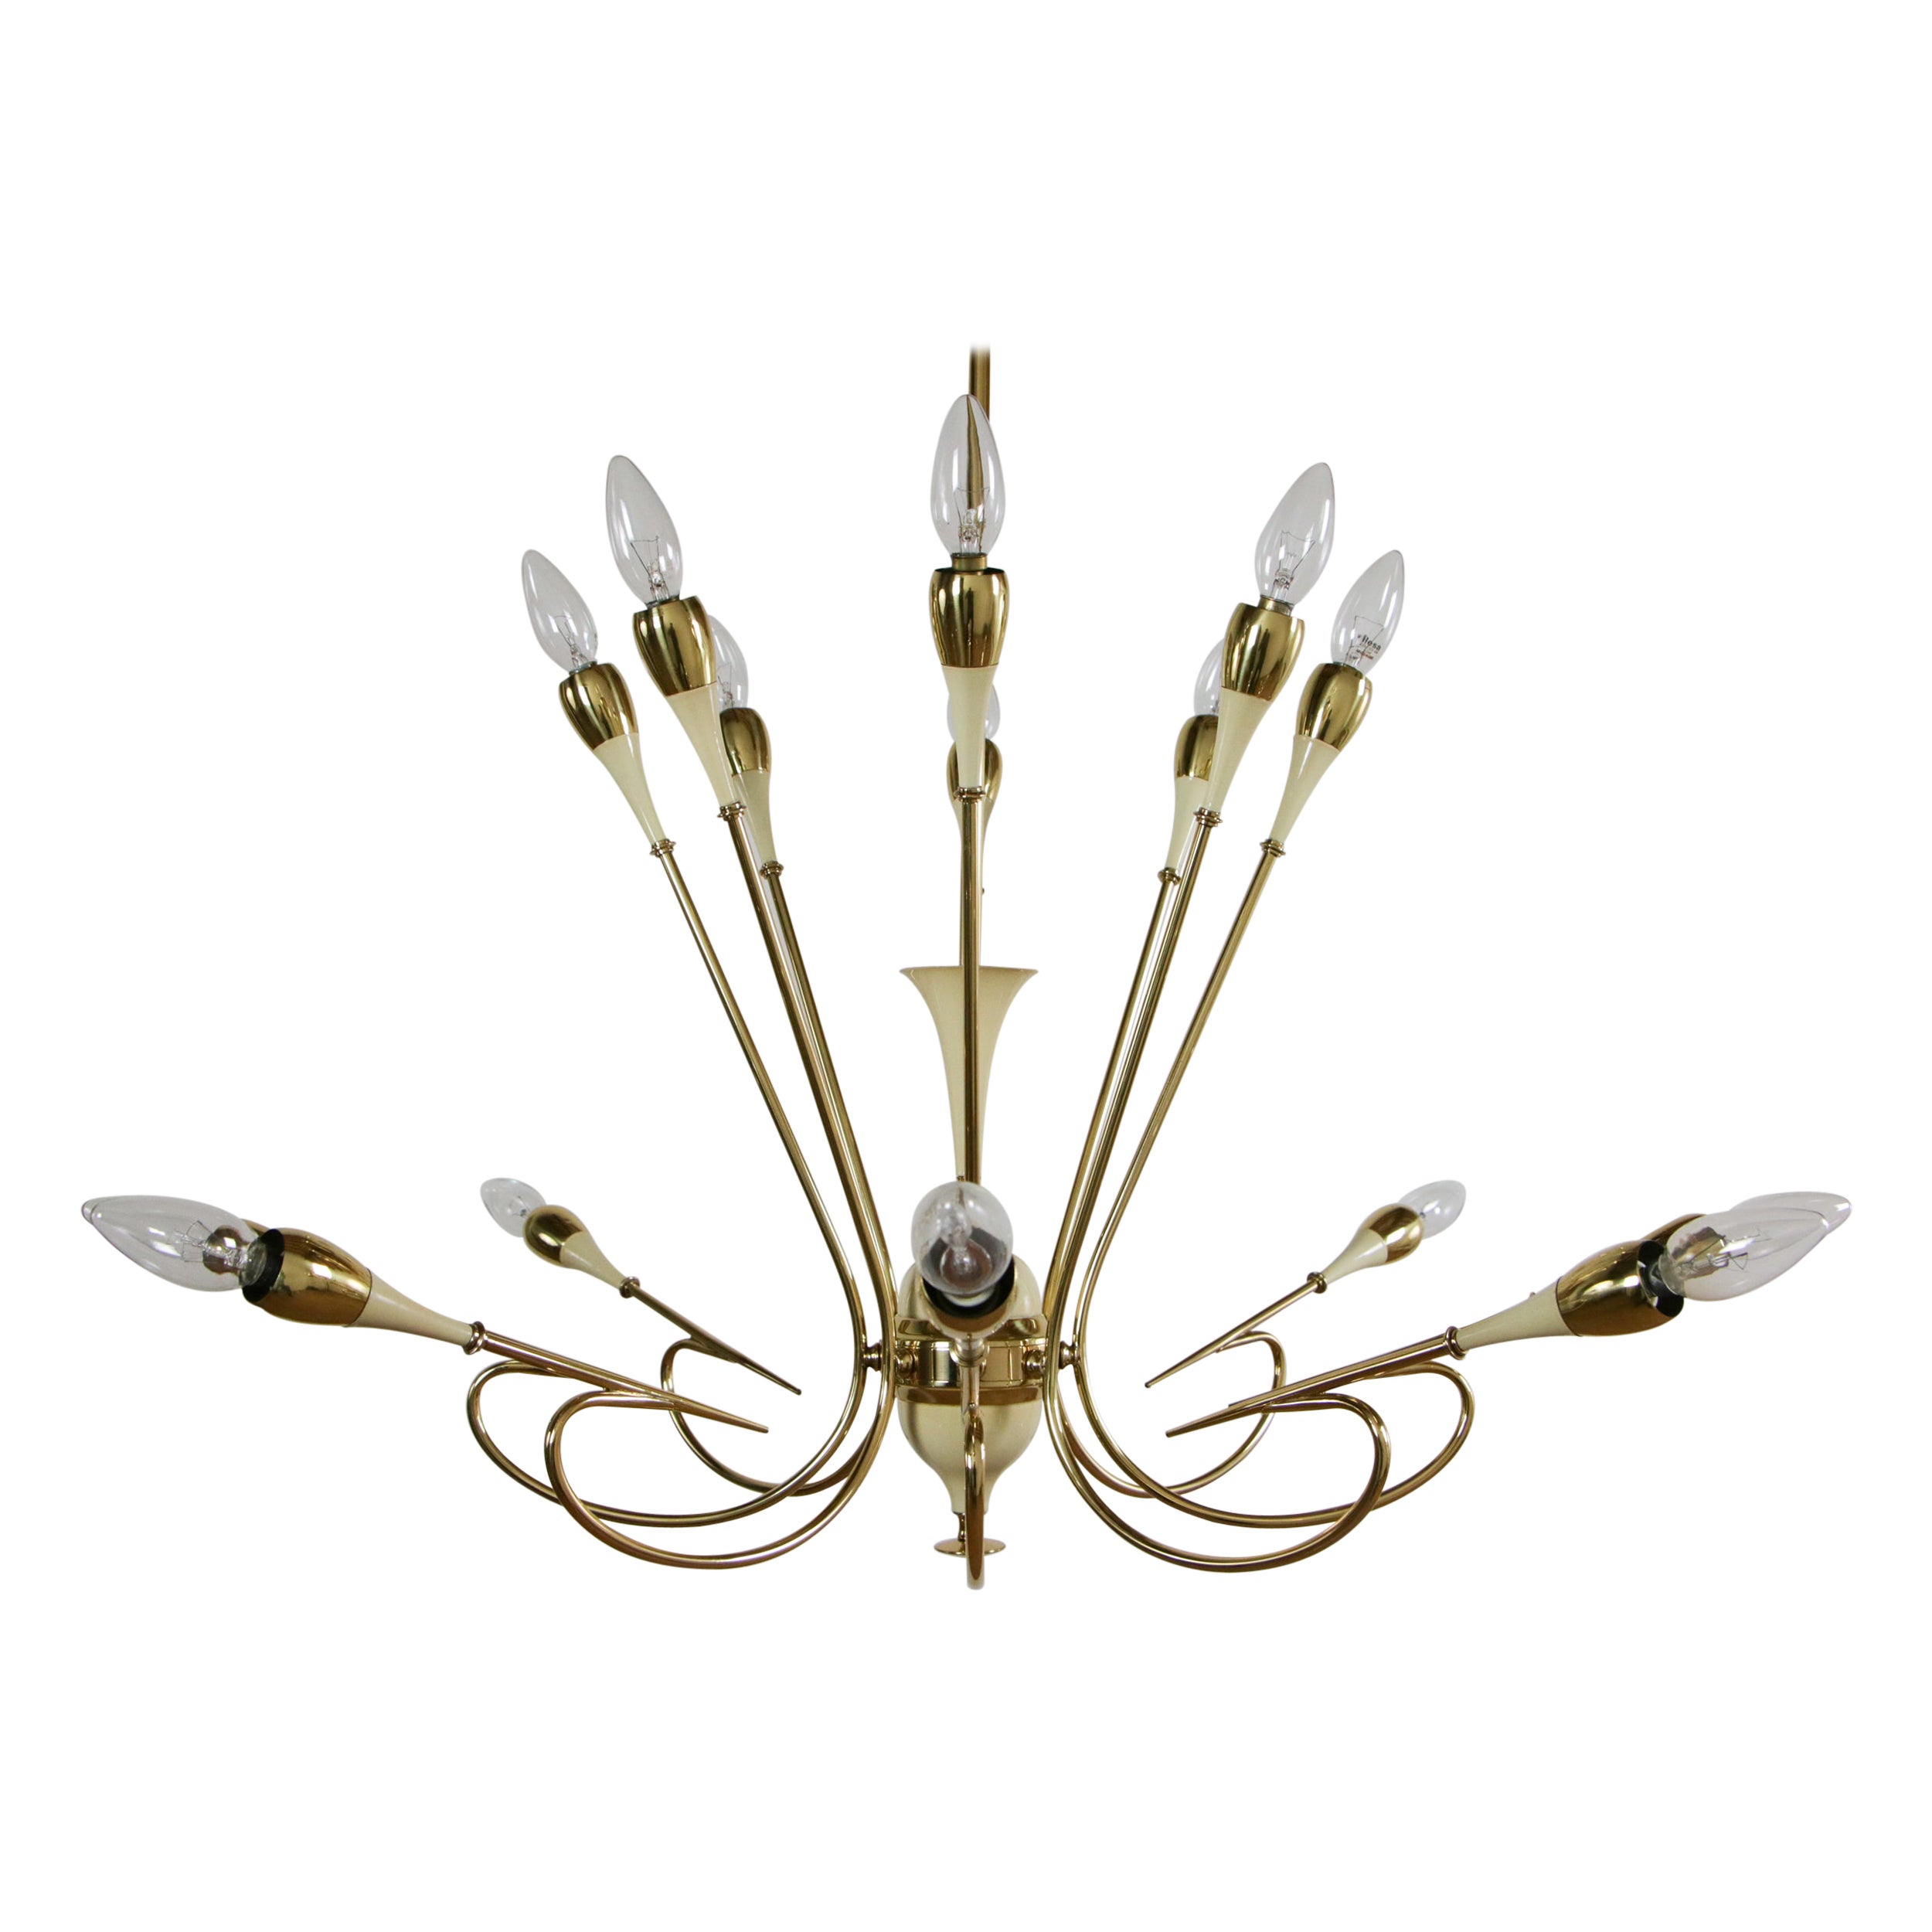 It is a stunning and rare Italian mid-century chandelier by Oscar Torlasco for Lumi Milano. The chandelier is made of brass and ivory lacquered aluminum with 16 E14 lights. It has the exceptional executive quality and the brass parts are a design